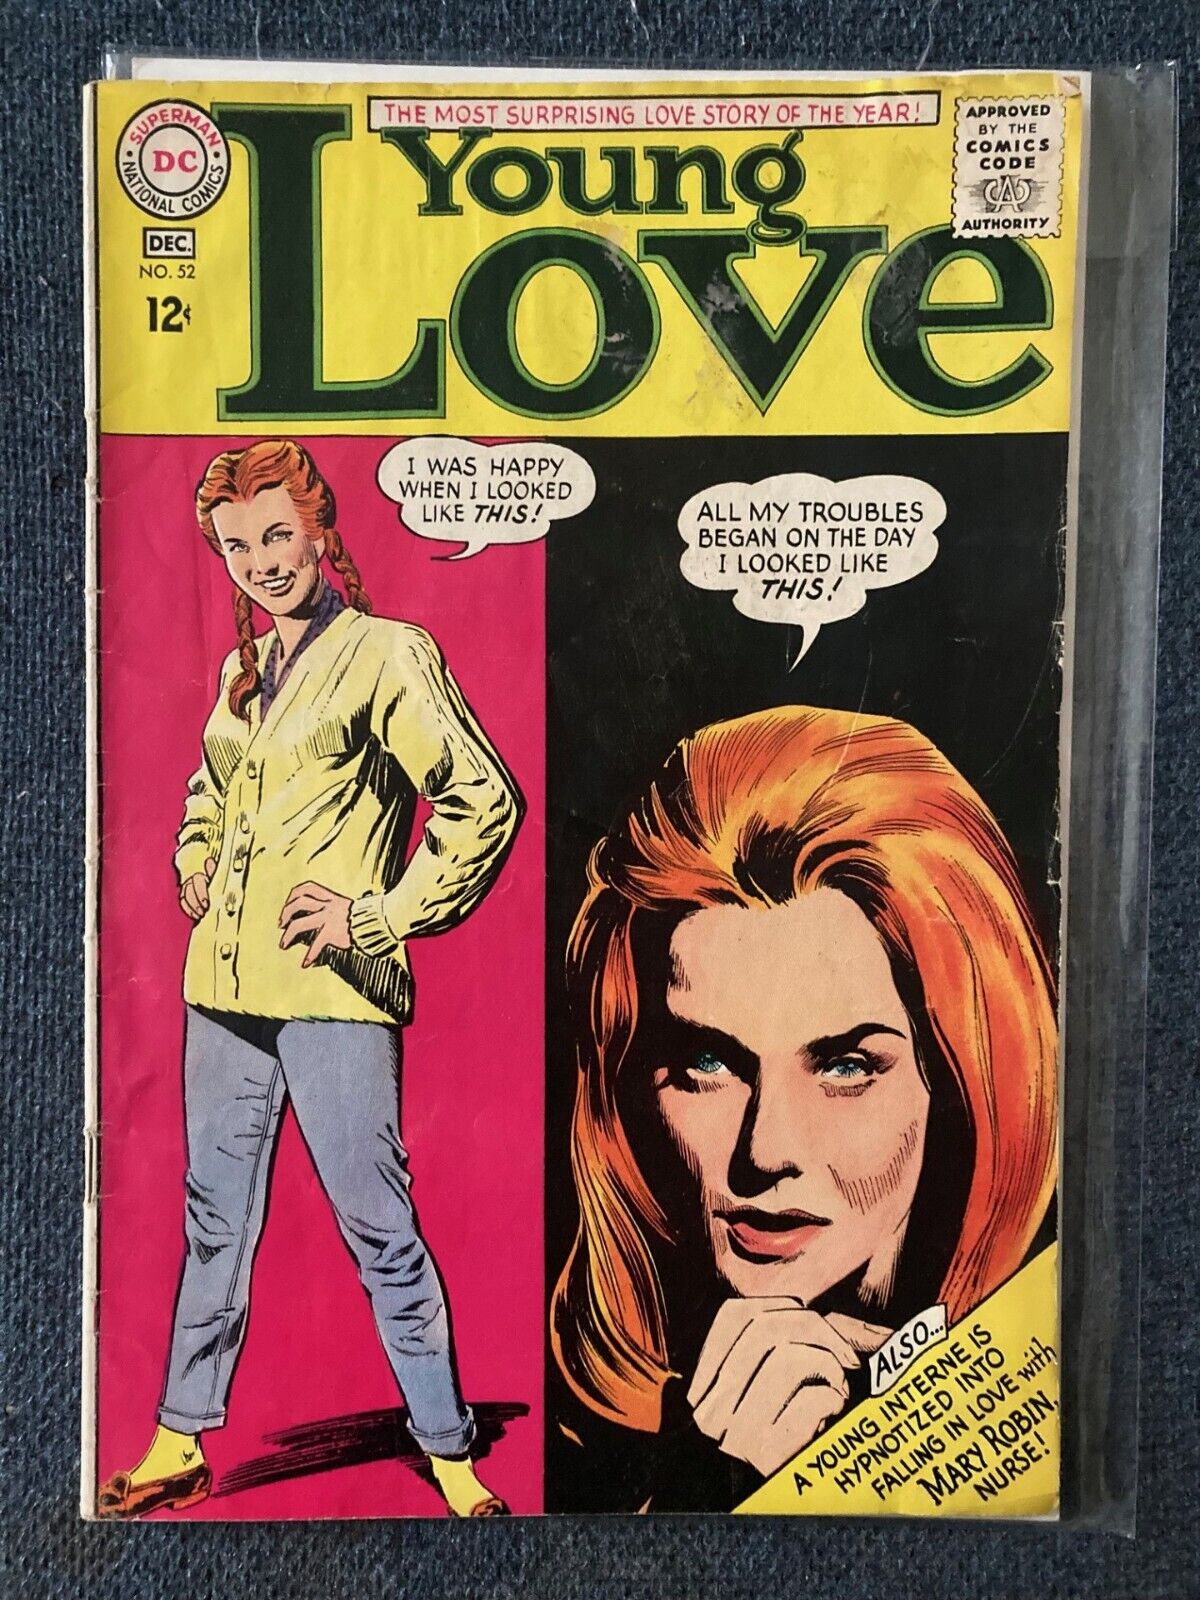 Young love 52 Gene colan Dick G vg